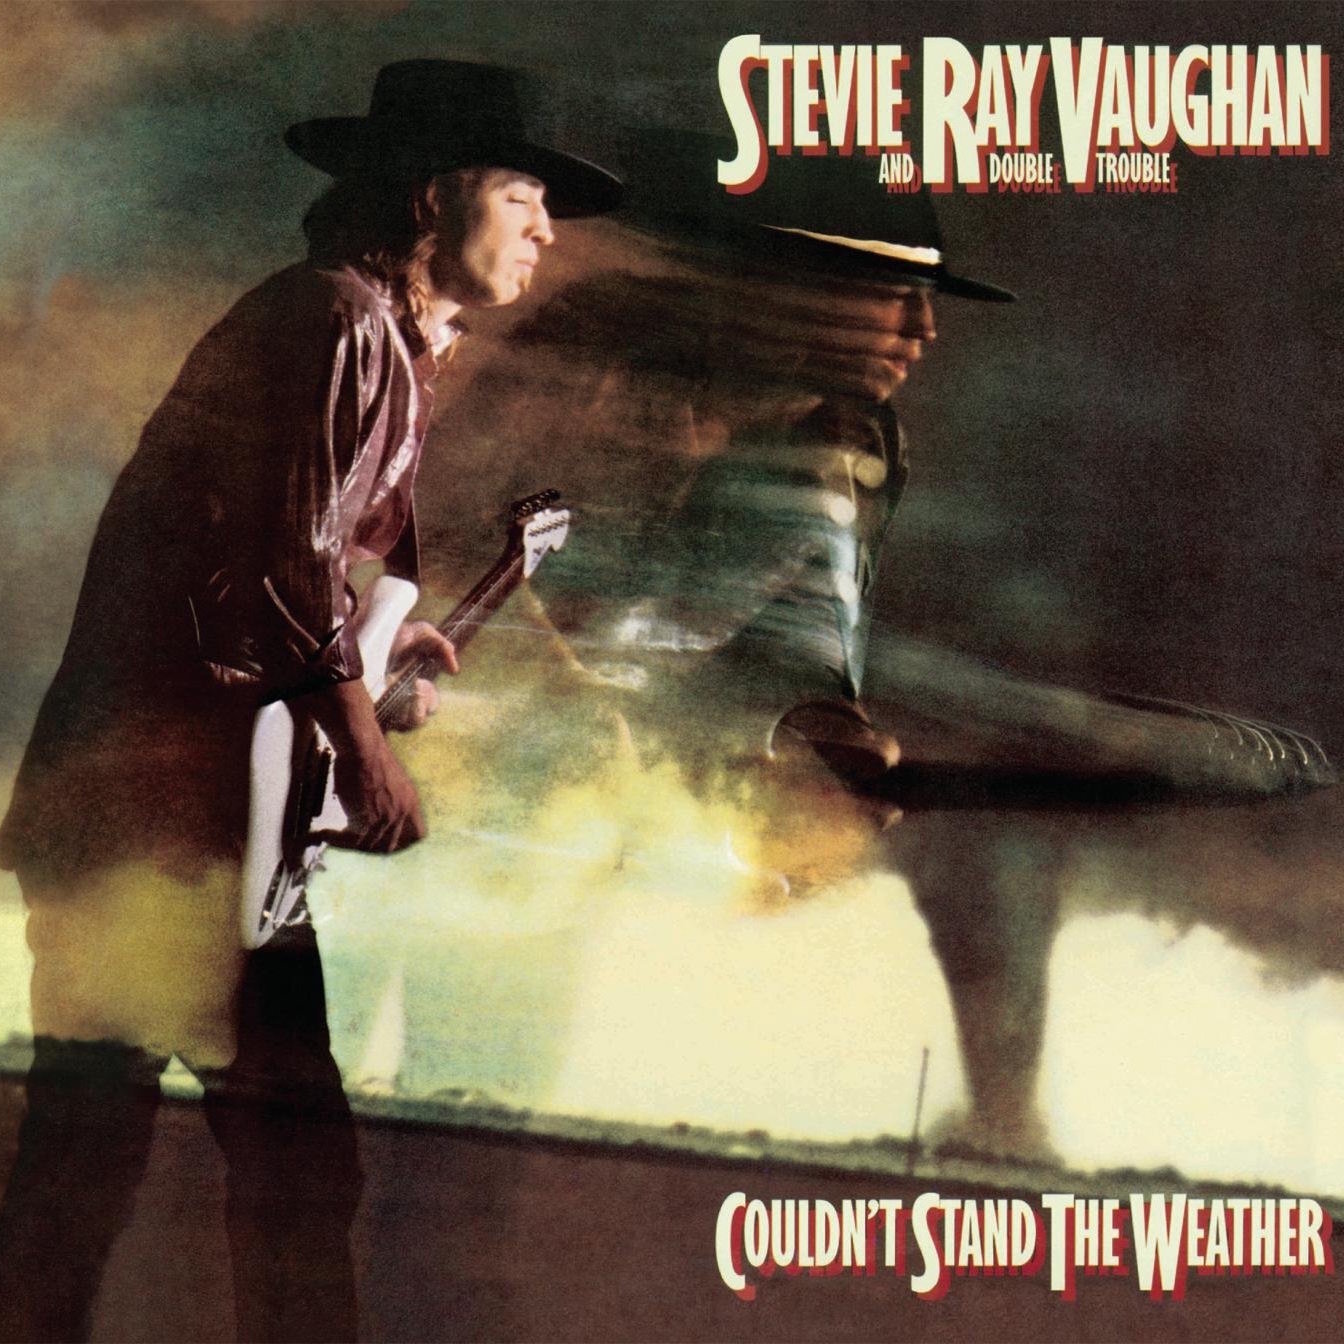 (30) Couldn't Stand the Weather - Stevie Ray Vaughn and Double Trouble.jpg